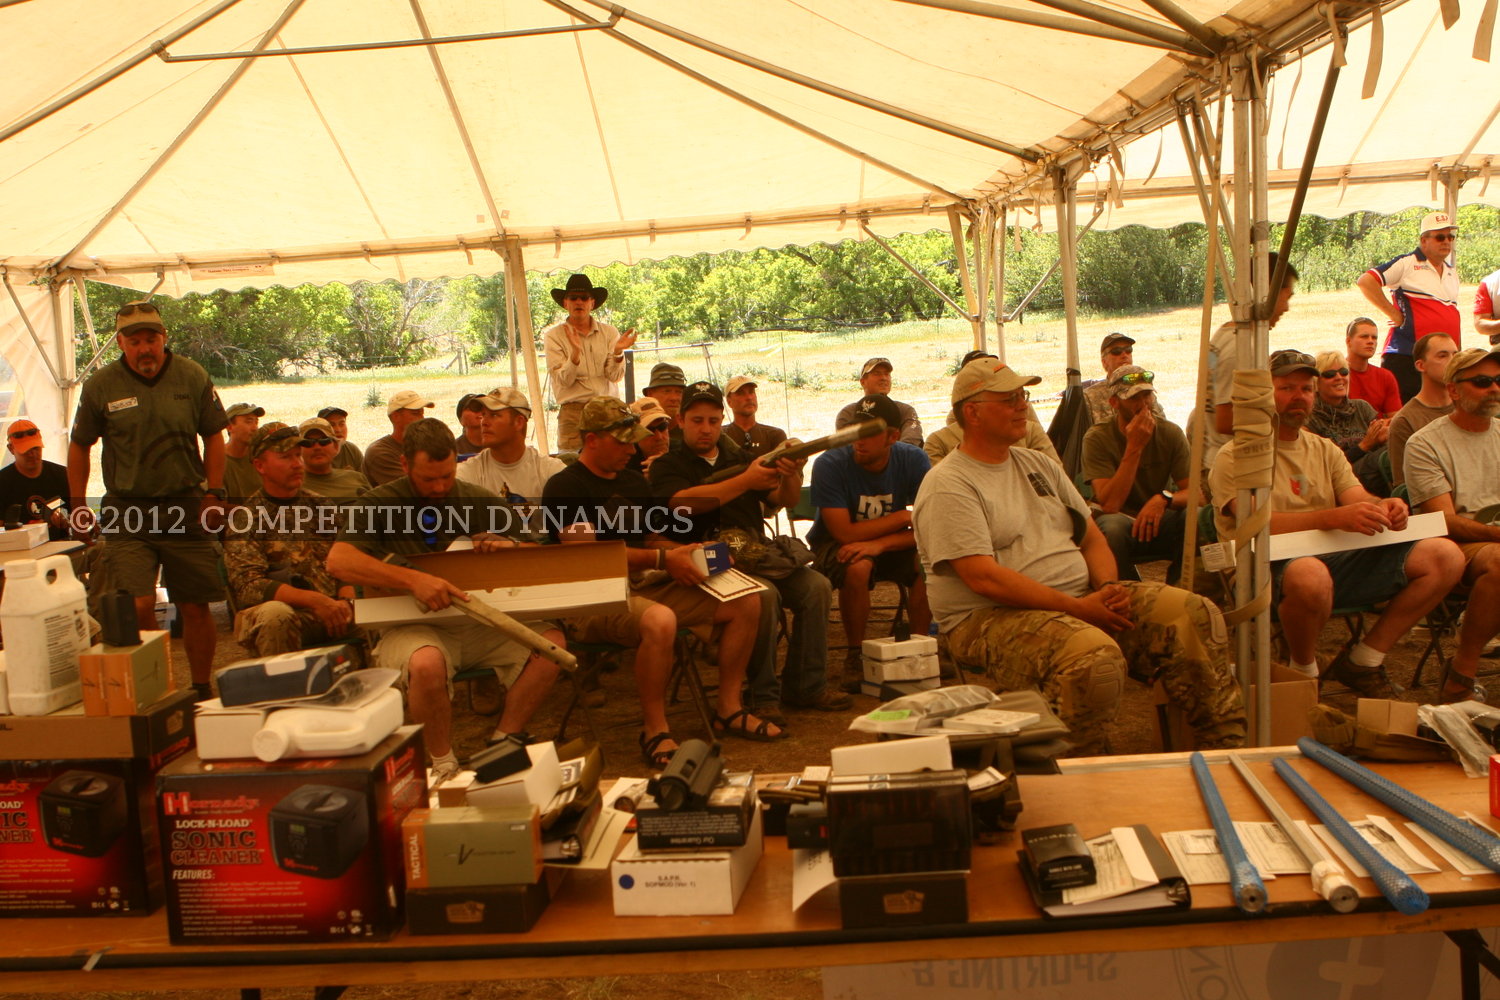 2012 Competition Dynamics SnipersHide Cup
, photo 